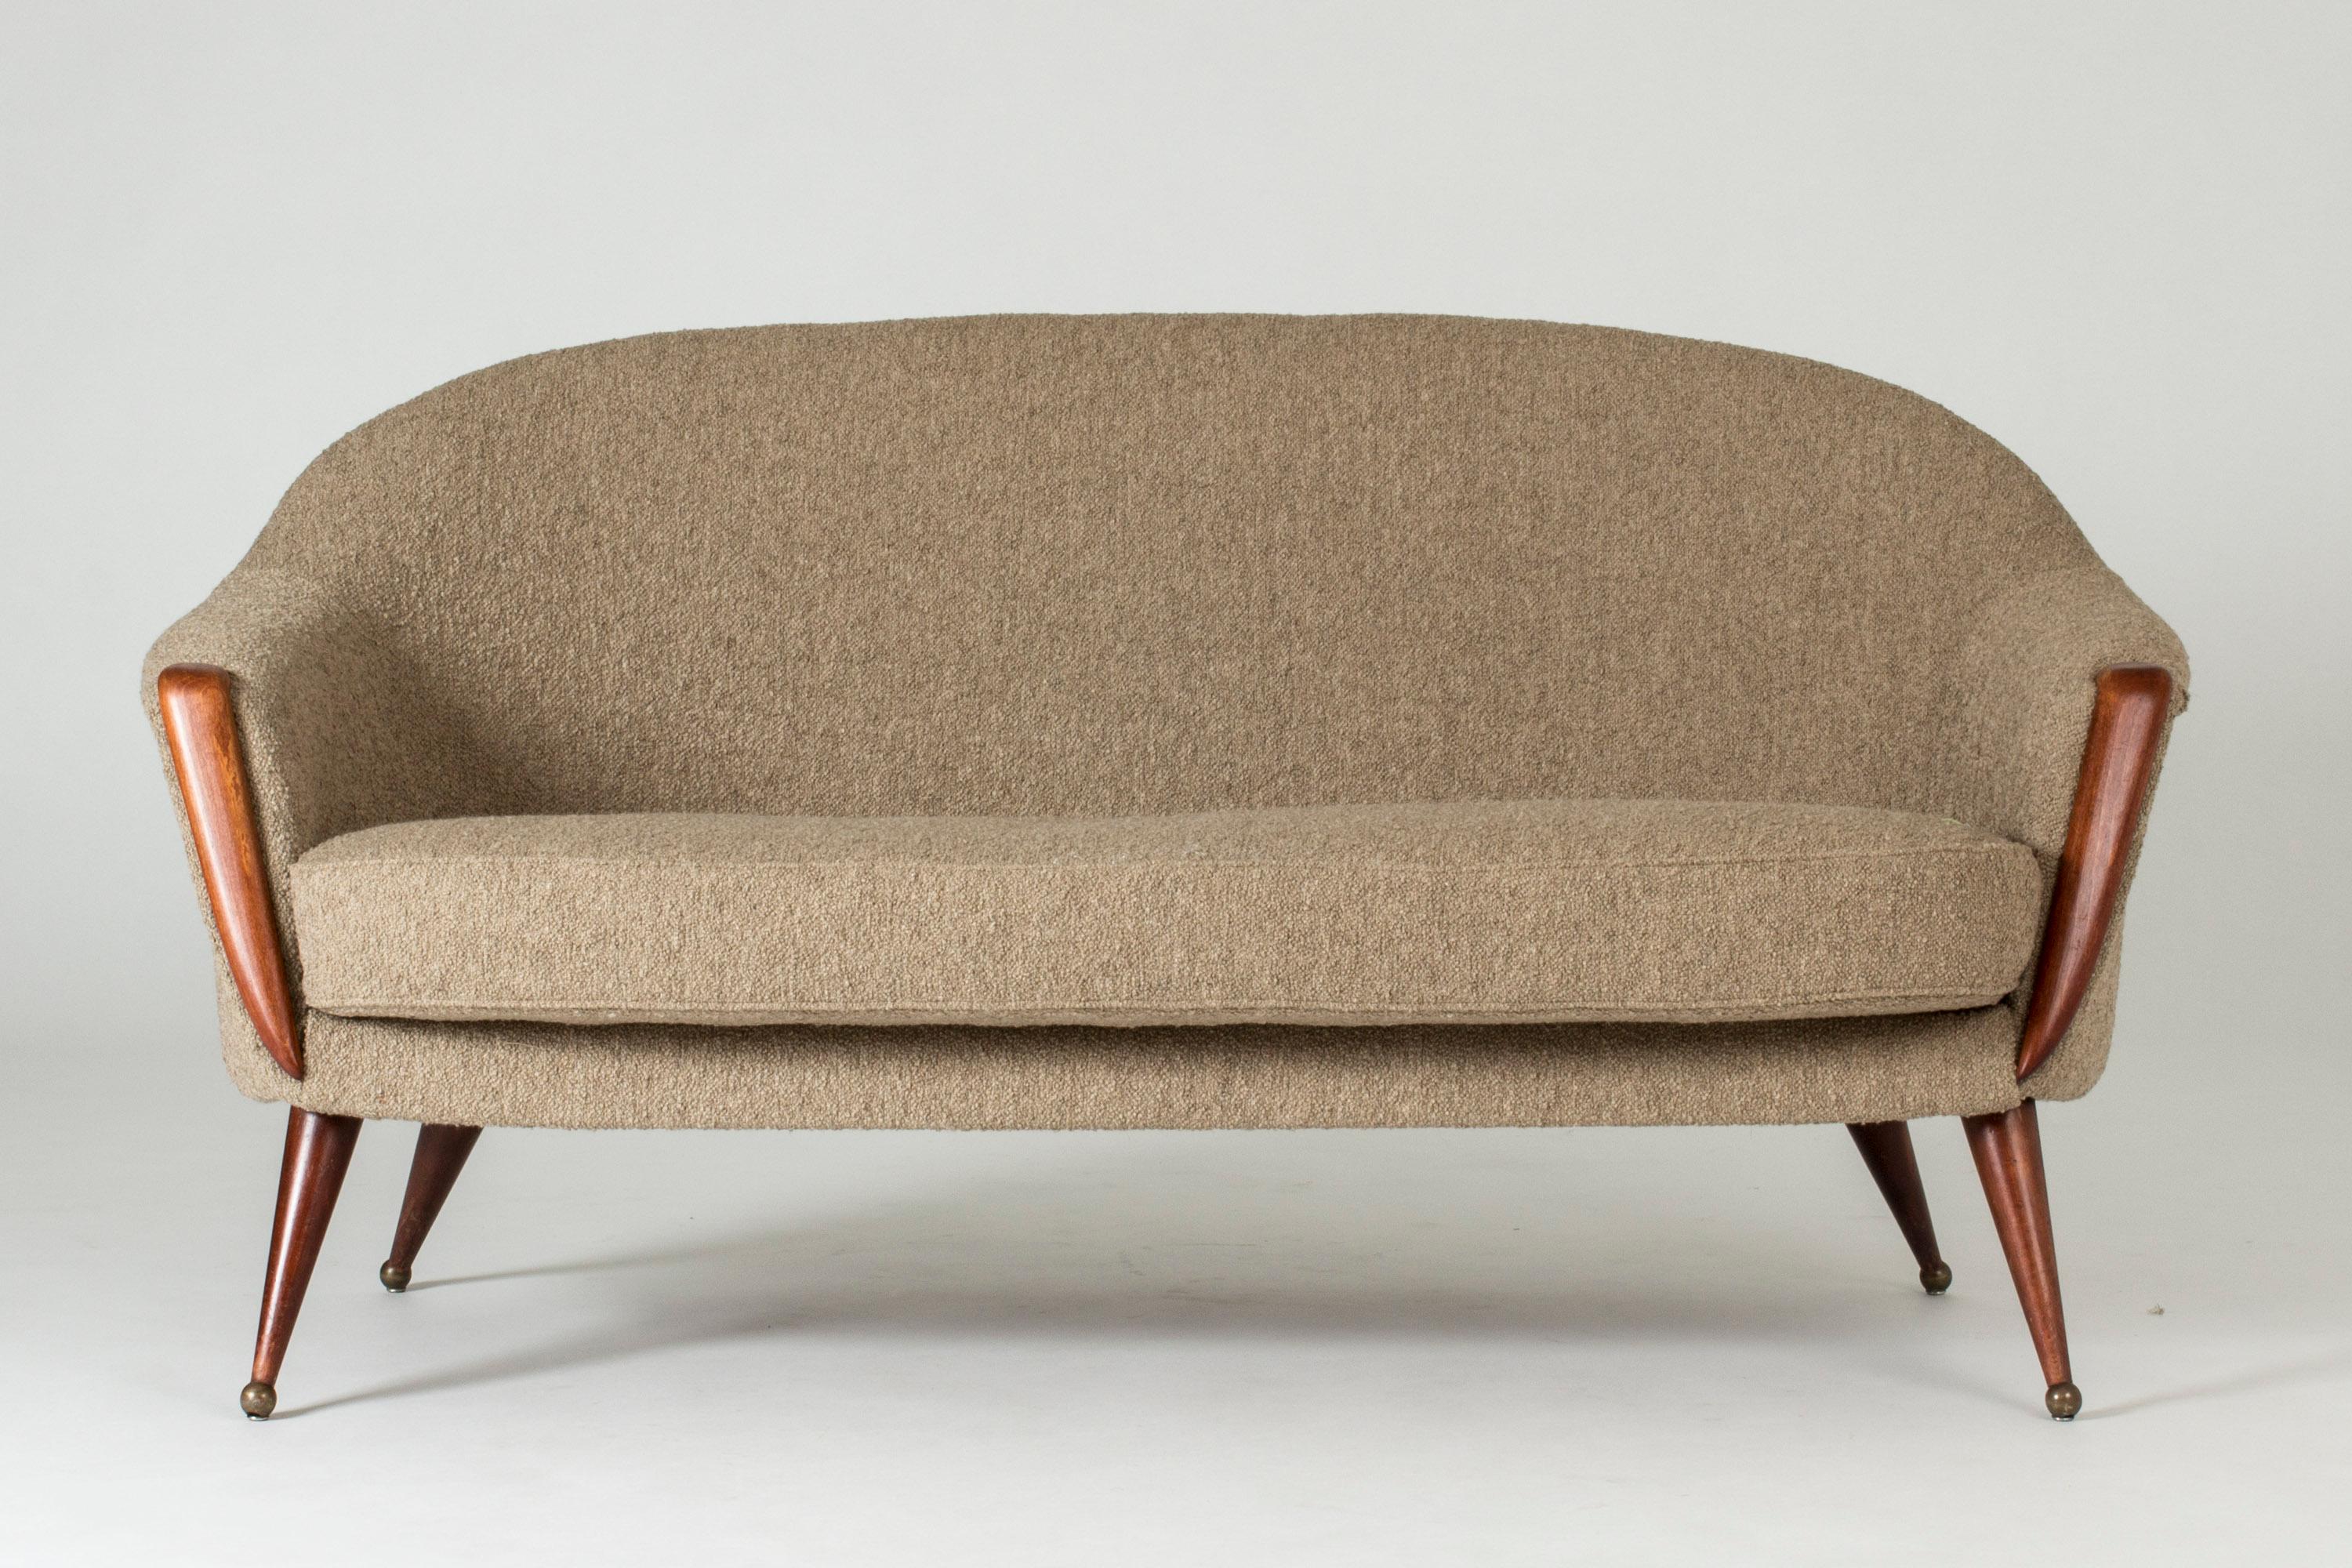 Elegant “Orion” sofa by Folke Jansson, in a rounded design. Brown wooden legs and details on the front, round brass ball feet. Bouclé upholstery.